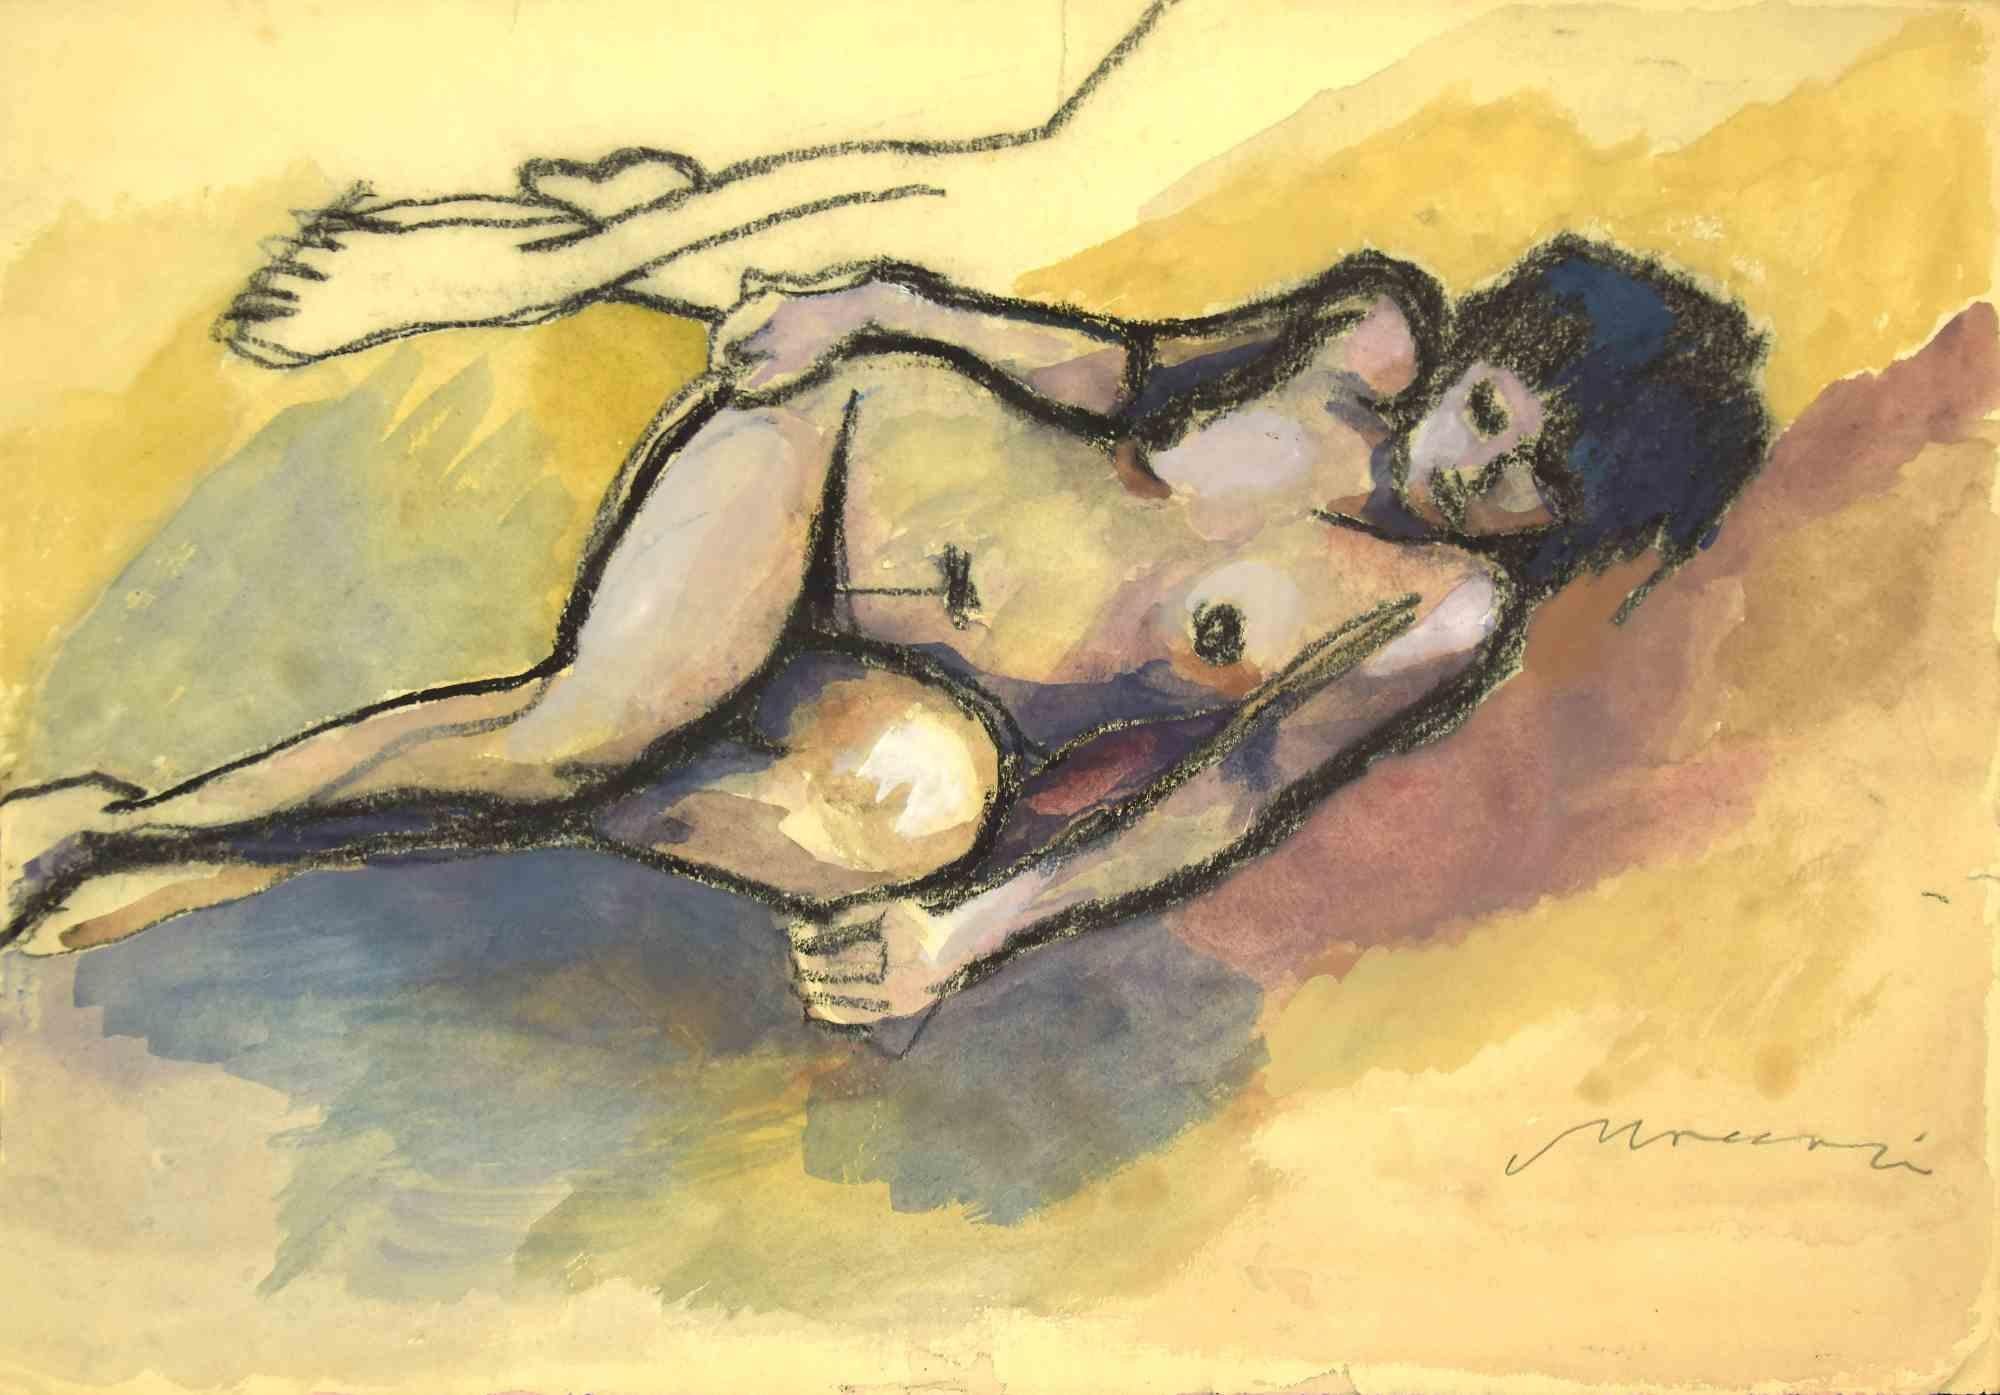 Nude is a Drawing in charcoal and watercolor on cream-colored paper realized by Mino Maccari in the 1930s.

hand-signed on the lower right.

Good conditions with minor folding and cut on margins.

Mino Maccari (1898-1989) was an Italian writer,